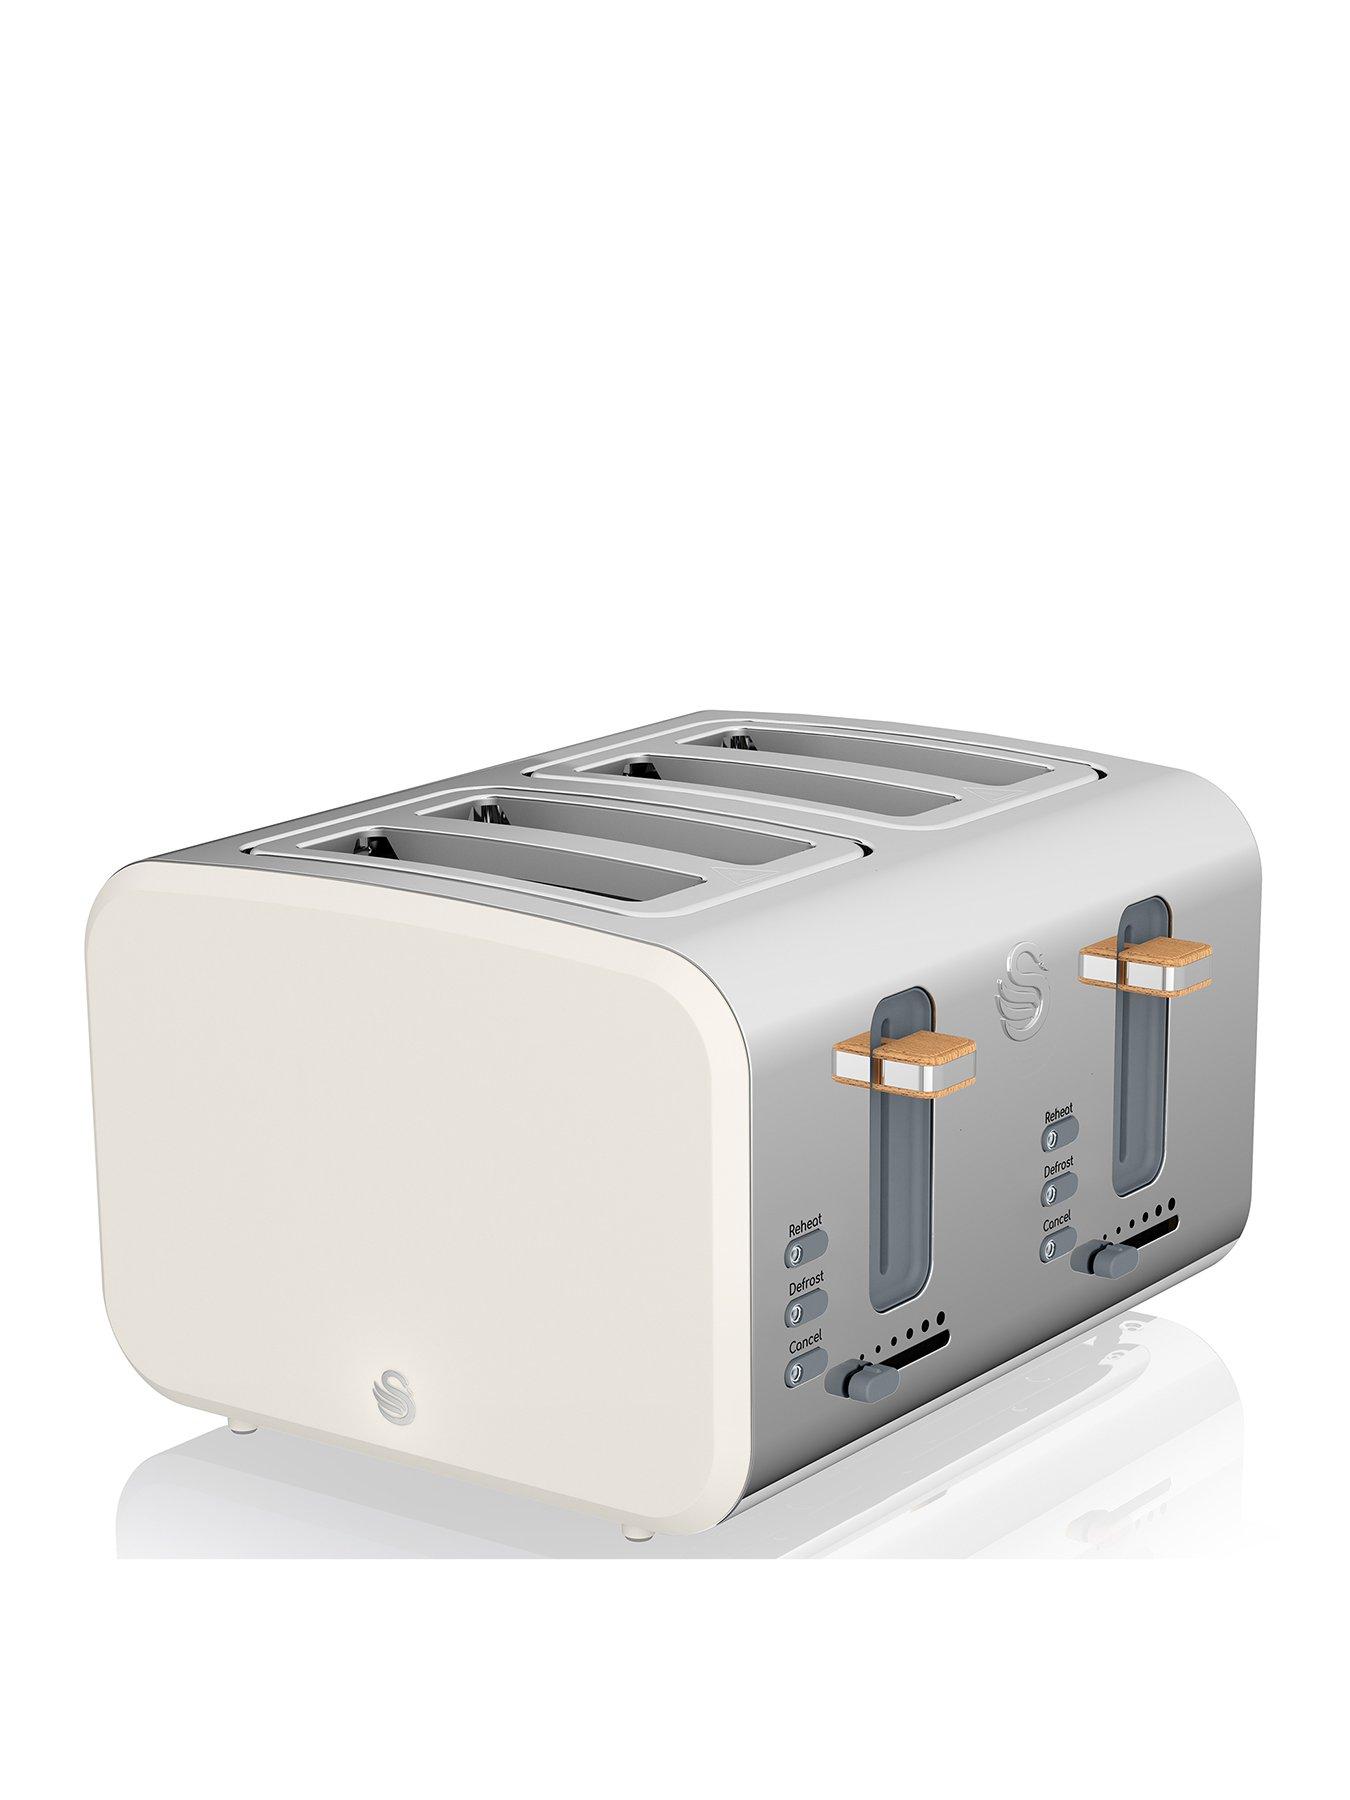 Swan St14620Whtn Nordic 4-Slice Toaster With Defrost/Reheat/Cancel Functions, Cord Storage, 1500W, White